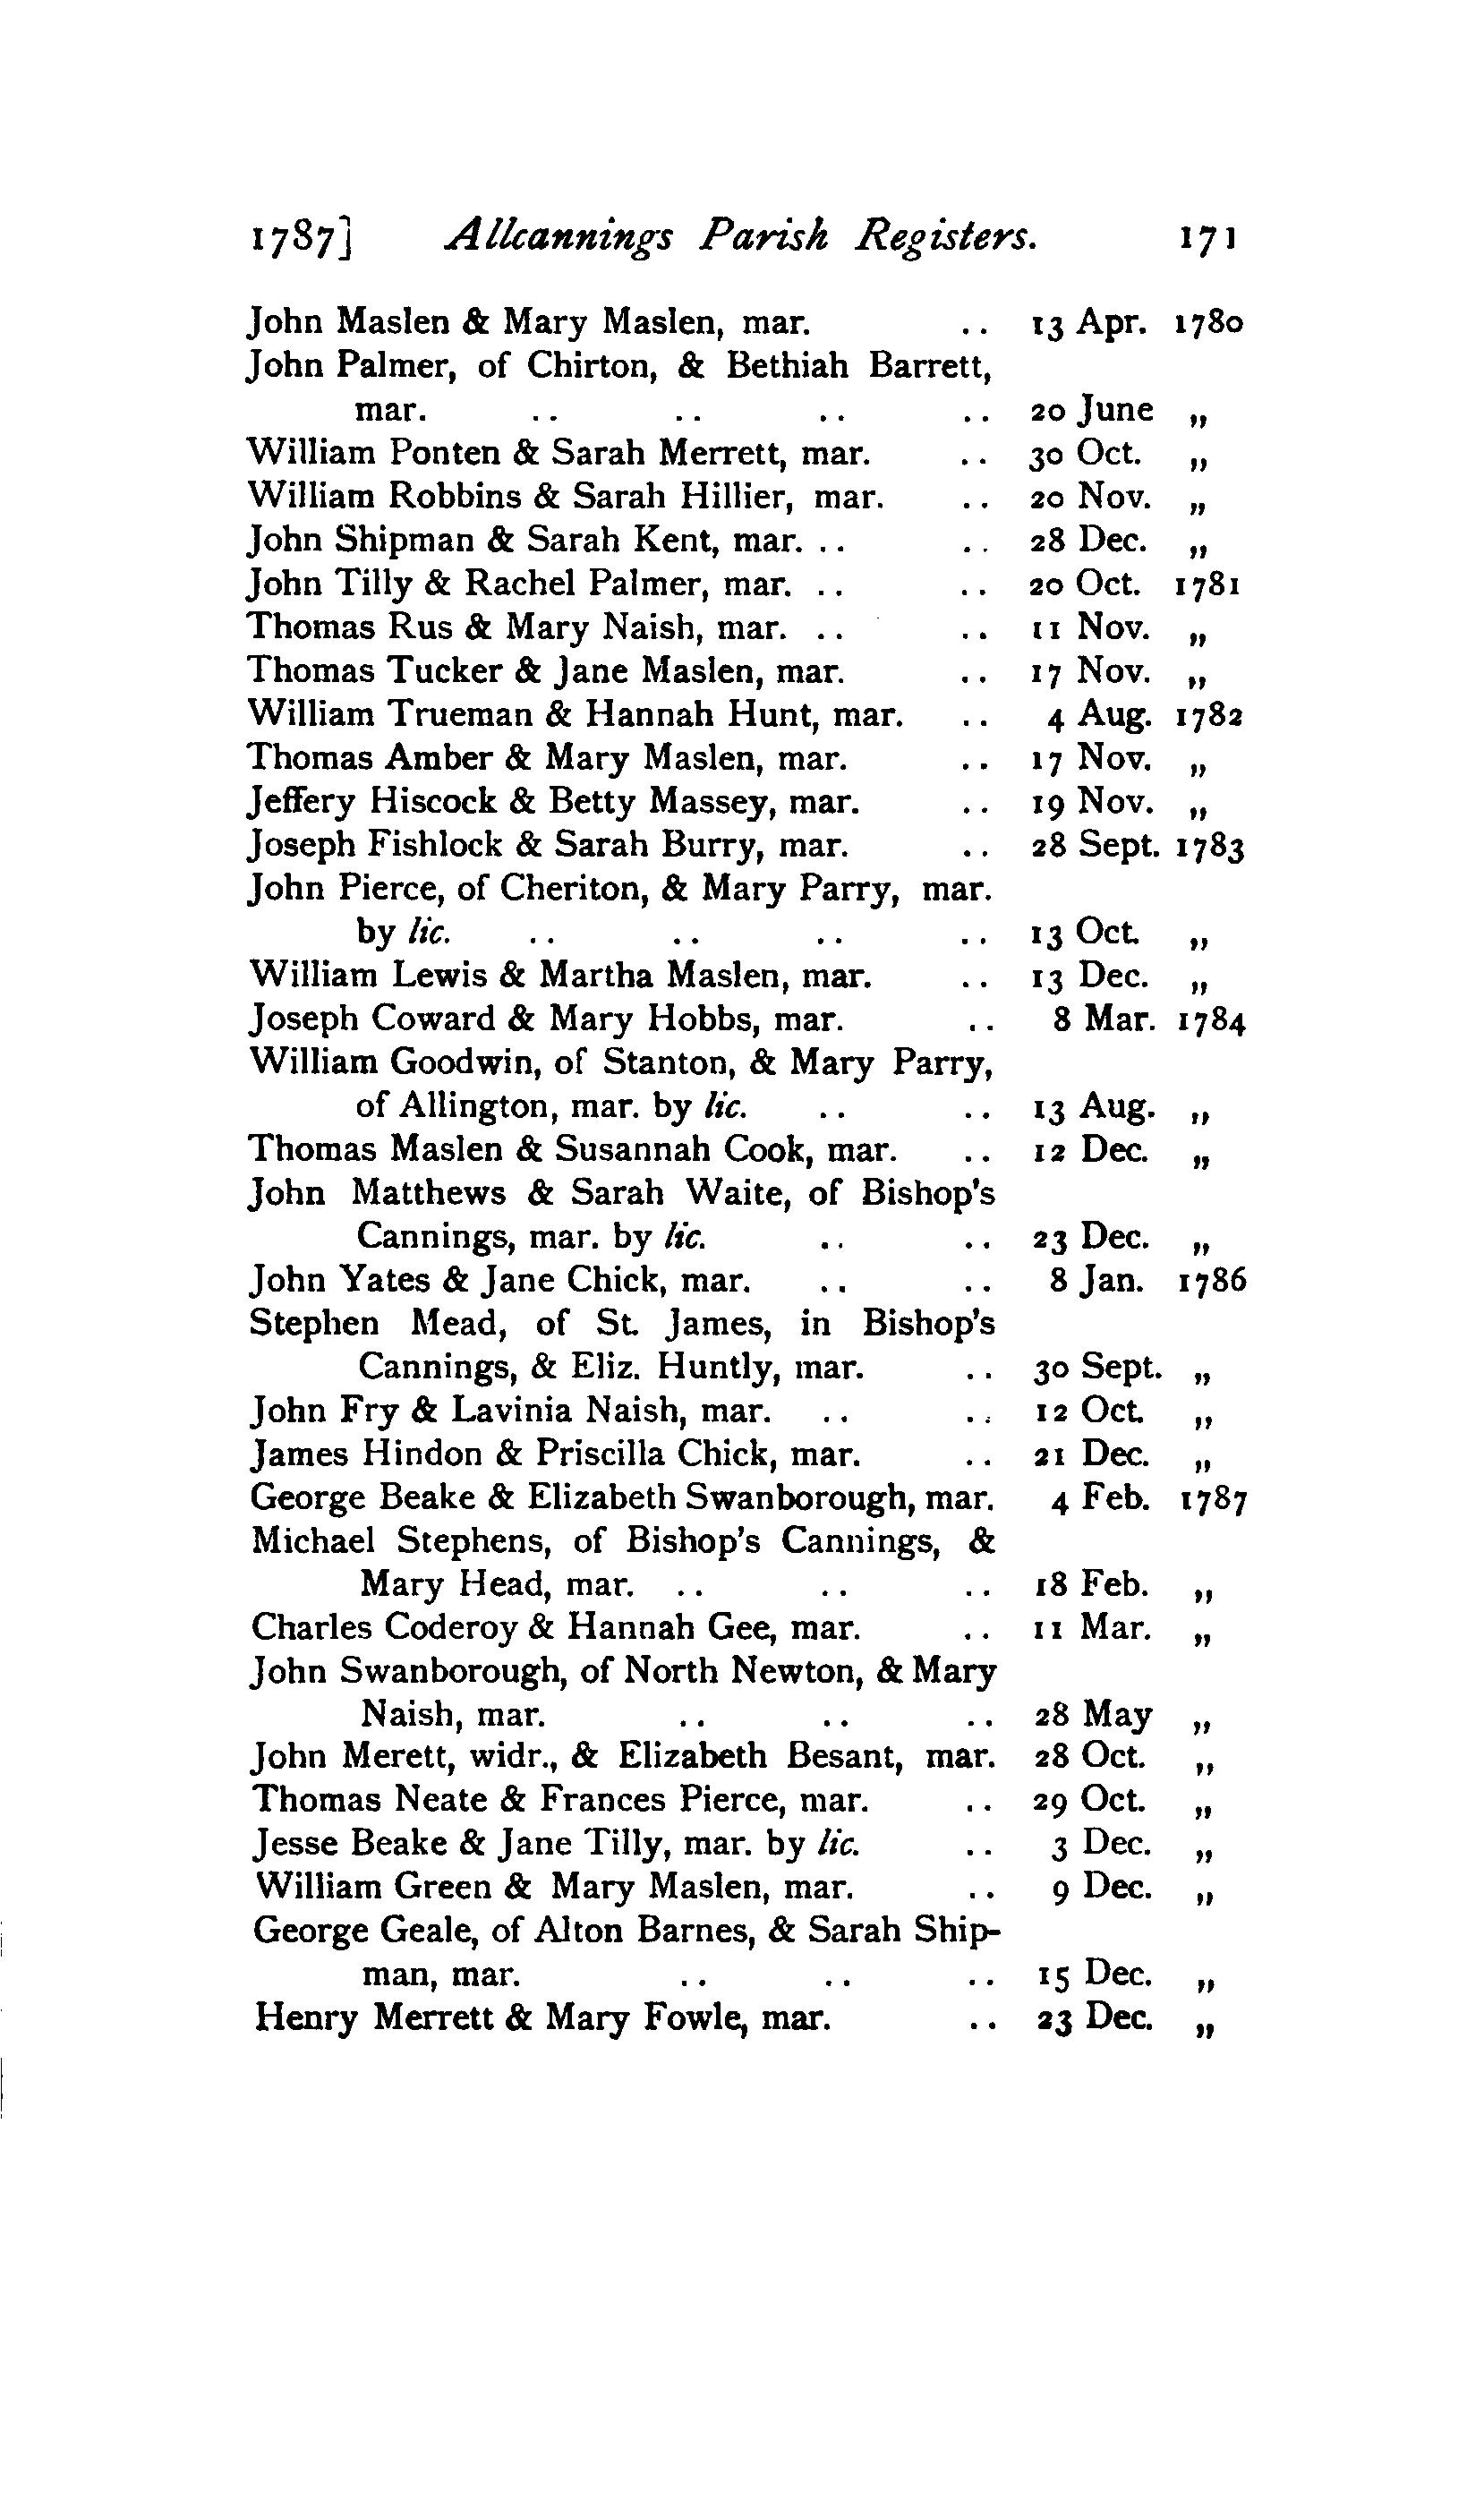 1905 transcript of All Cannings registers showing marriage of George Beake and Elizabeth Swanborough in 1787